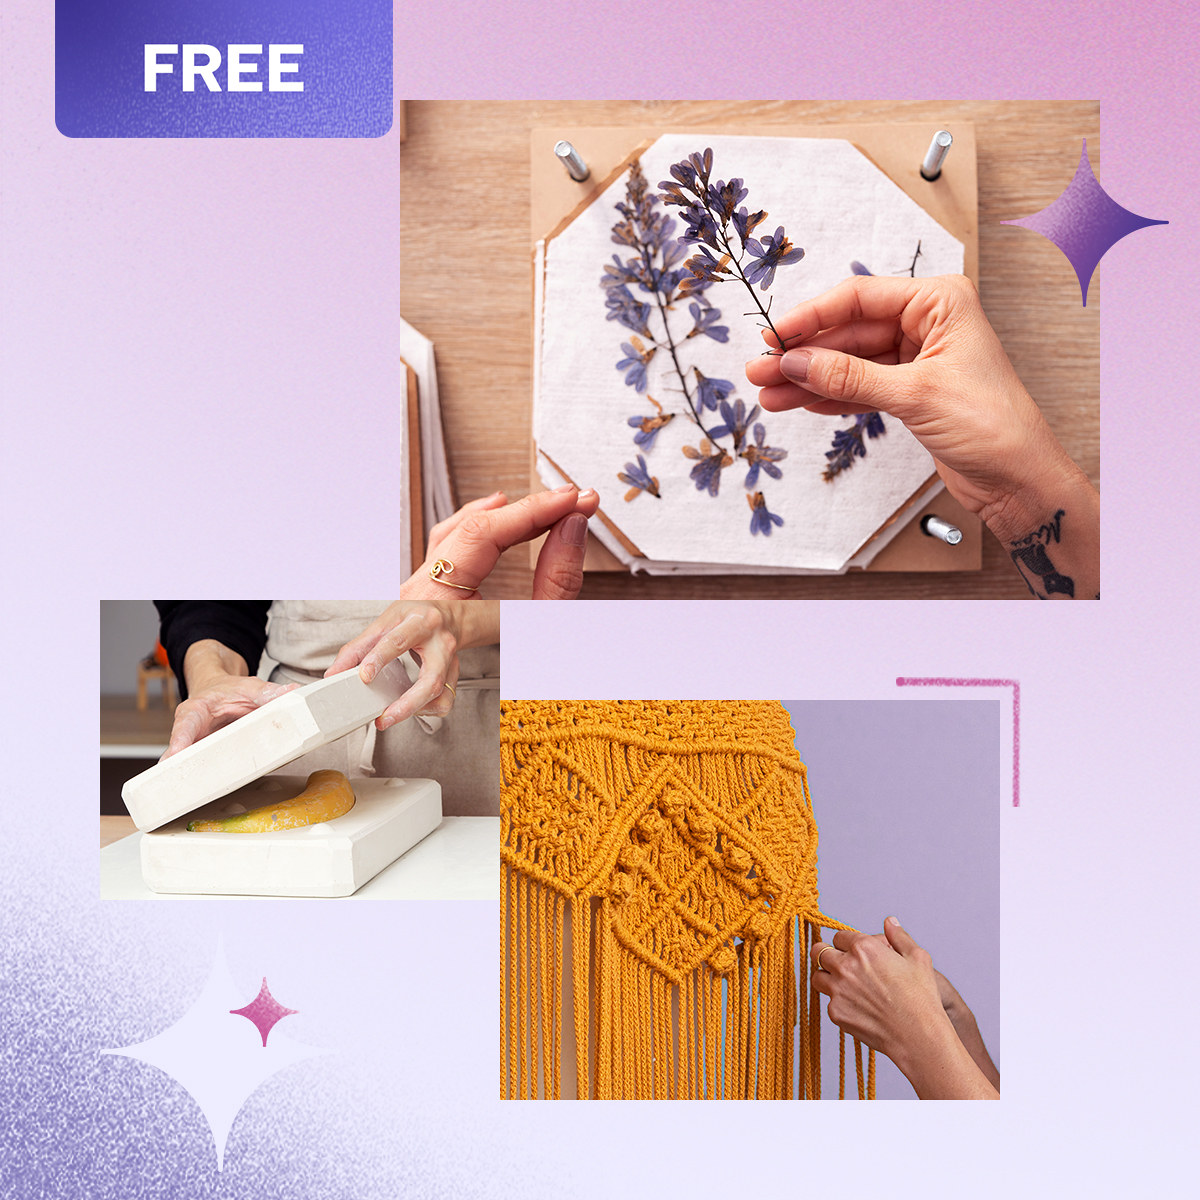 Learn Arts and Crafts - 14 Free Online Courses in 2023 - The